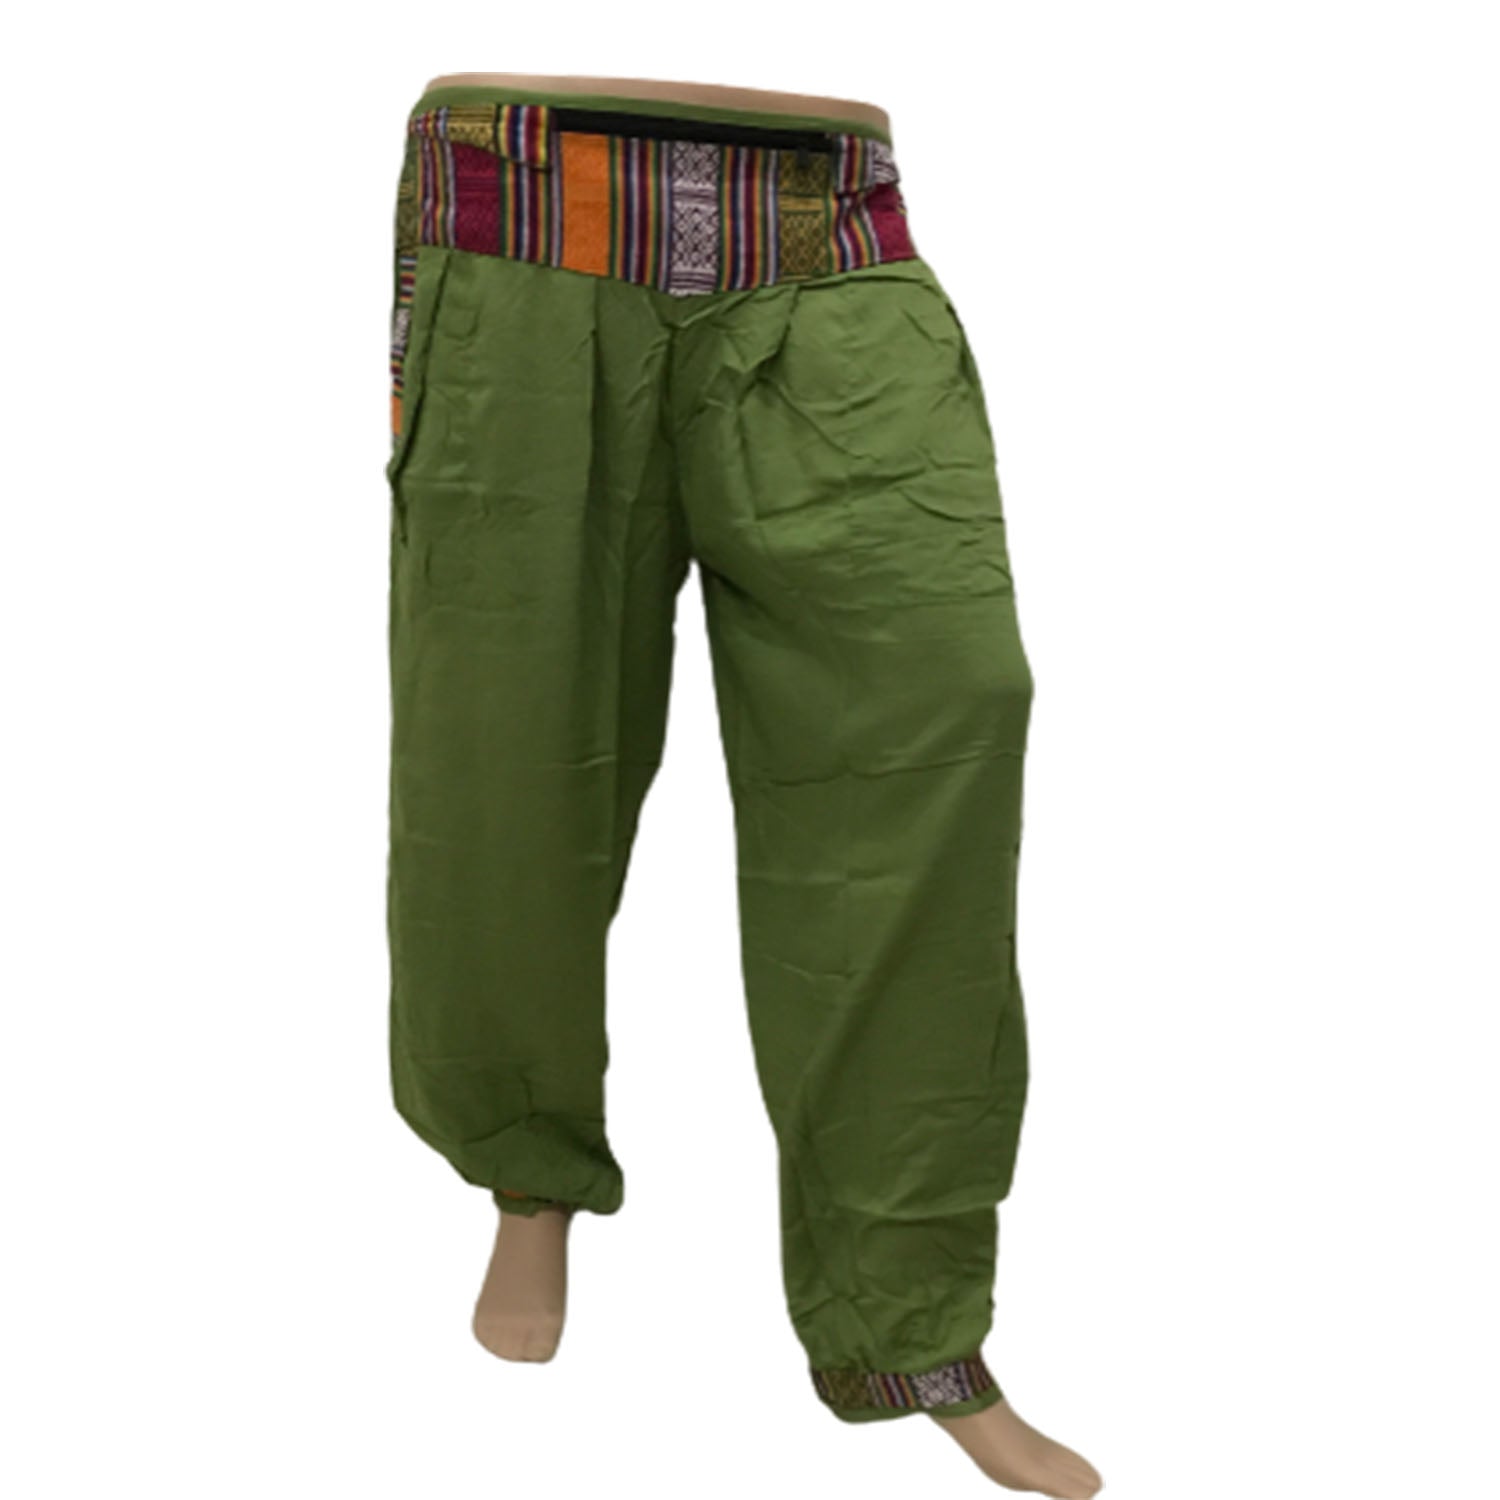 Ganesha Handicrafts, Cuffed Solid Colour Trousers, Colour Trousers, Trending Cuffed Colour Trousers, Green Colour Trousers.